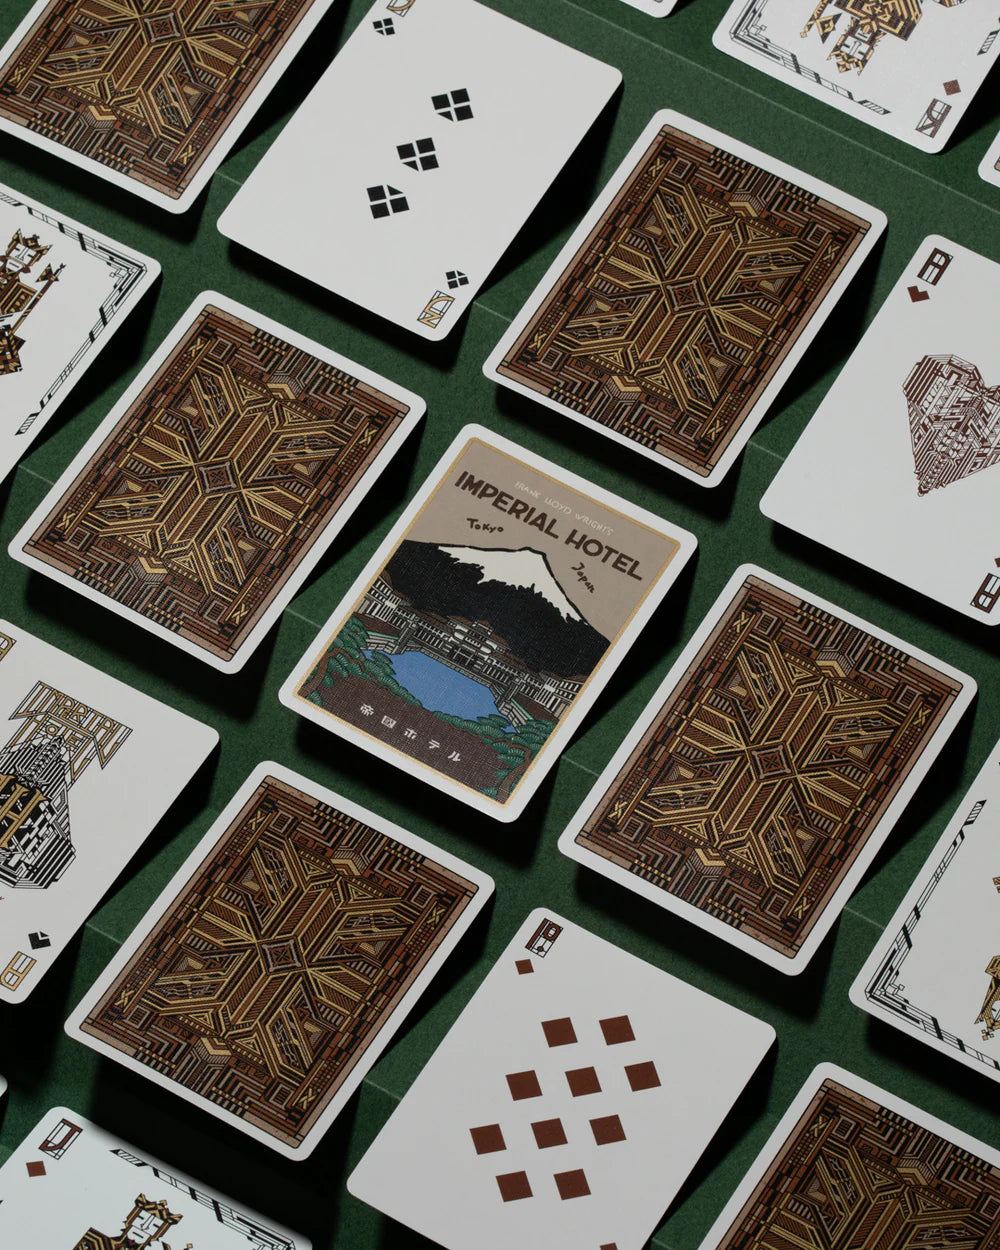 art of play : Imperial hotel playing cards